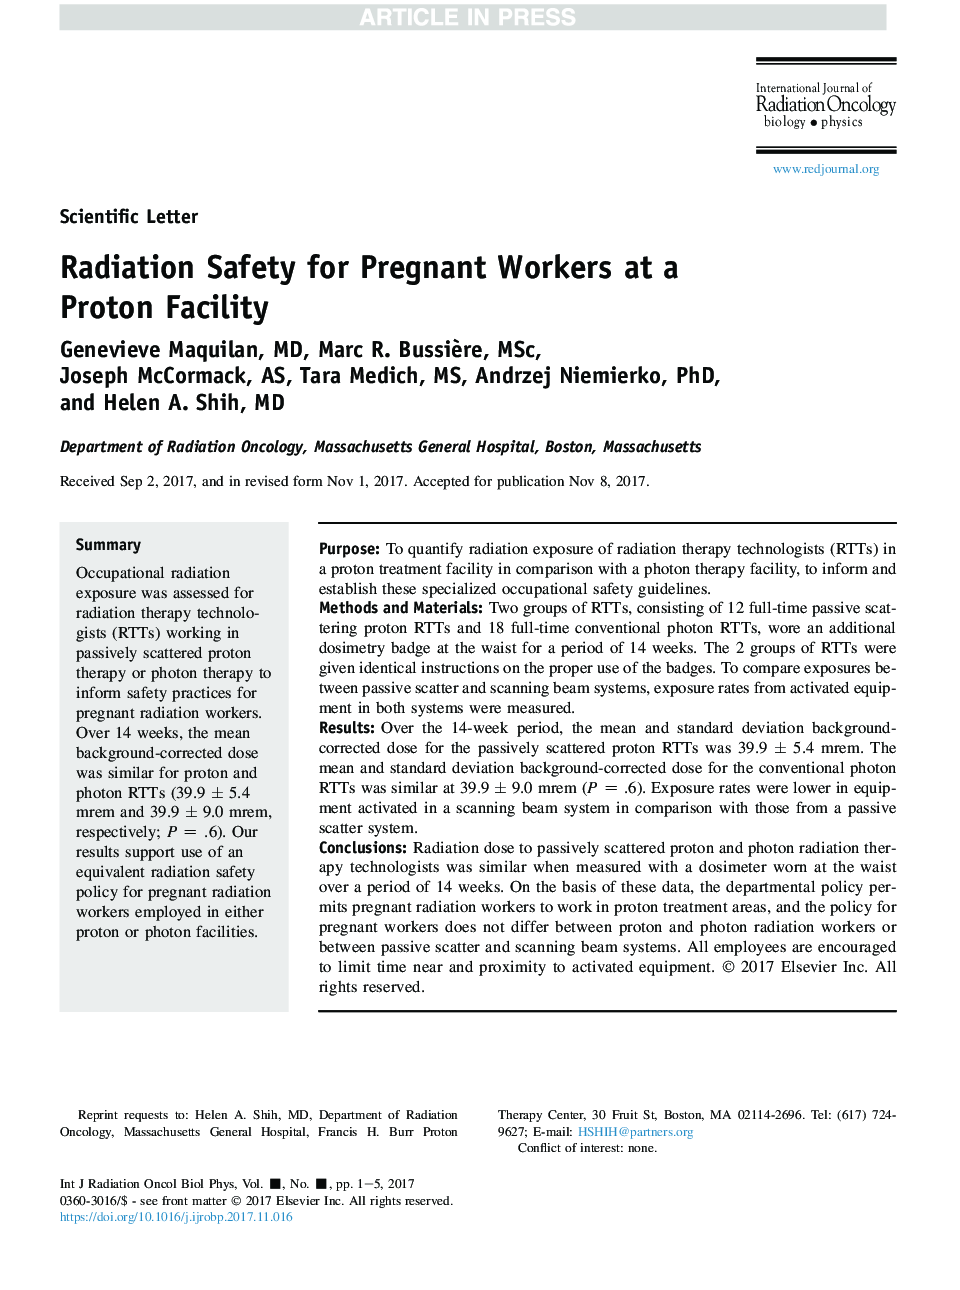 Radiation Safety for Pregnant Workers at a Proton Facility